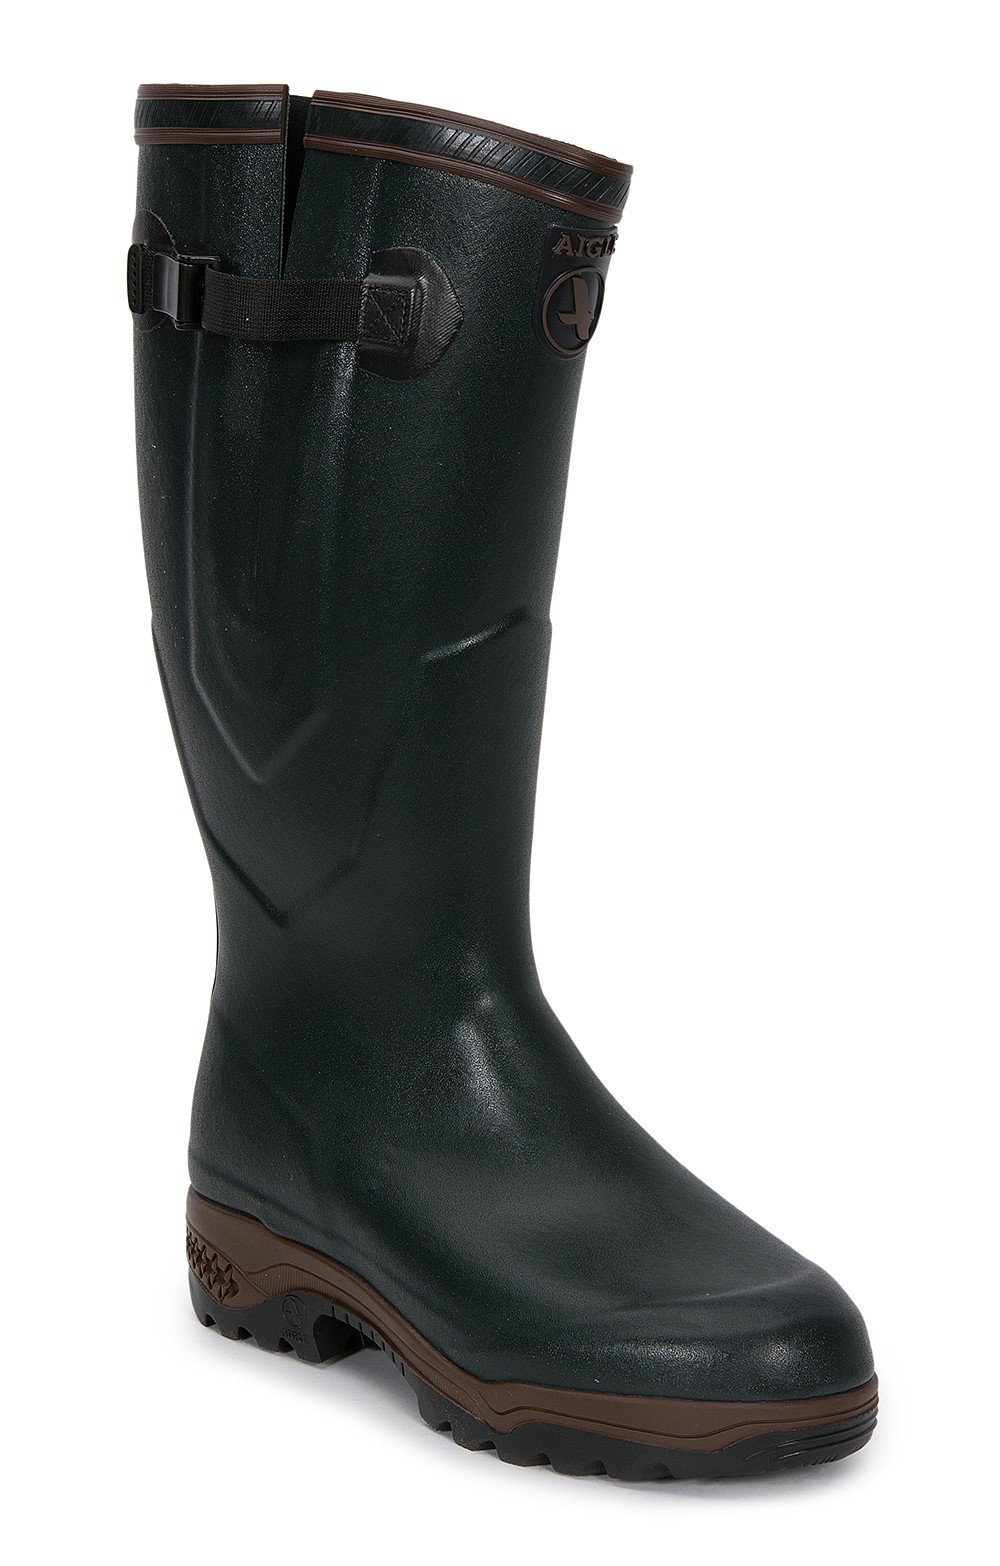 interval Ond udkast Aigle Wellington Boots Online Sale, UP TO 50% OFF